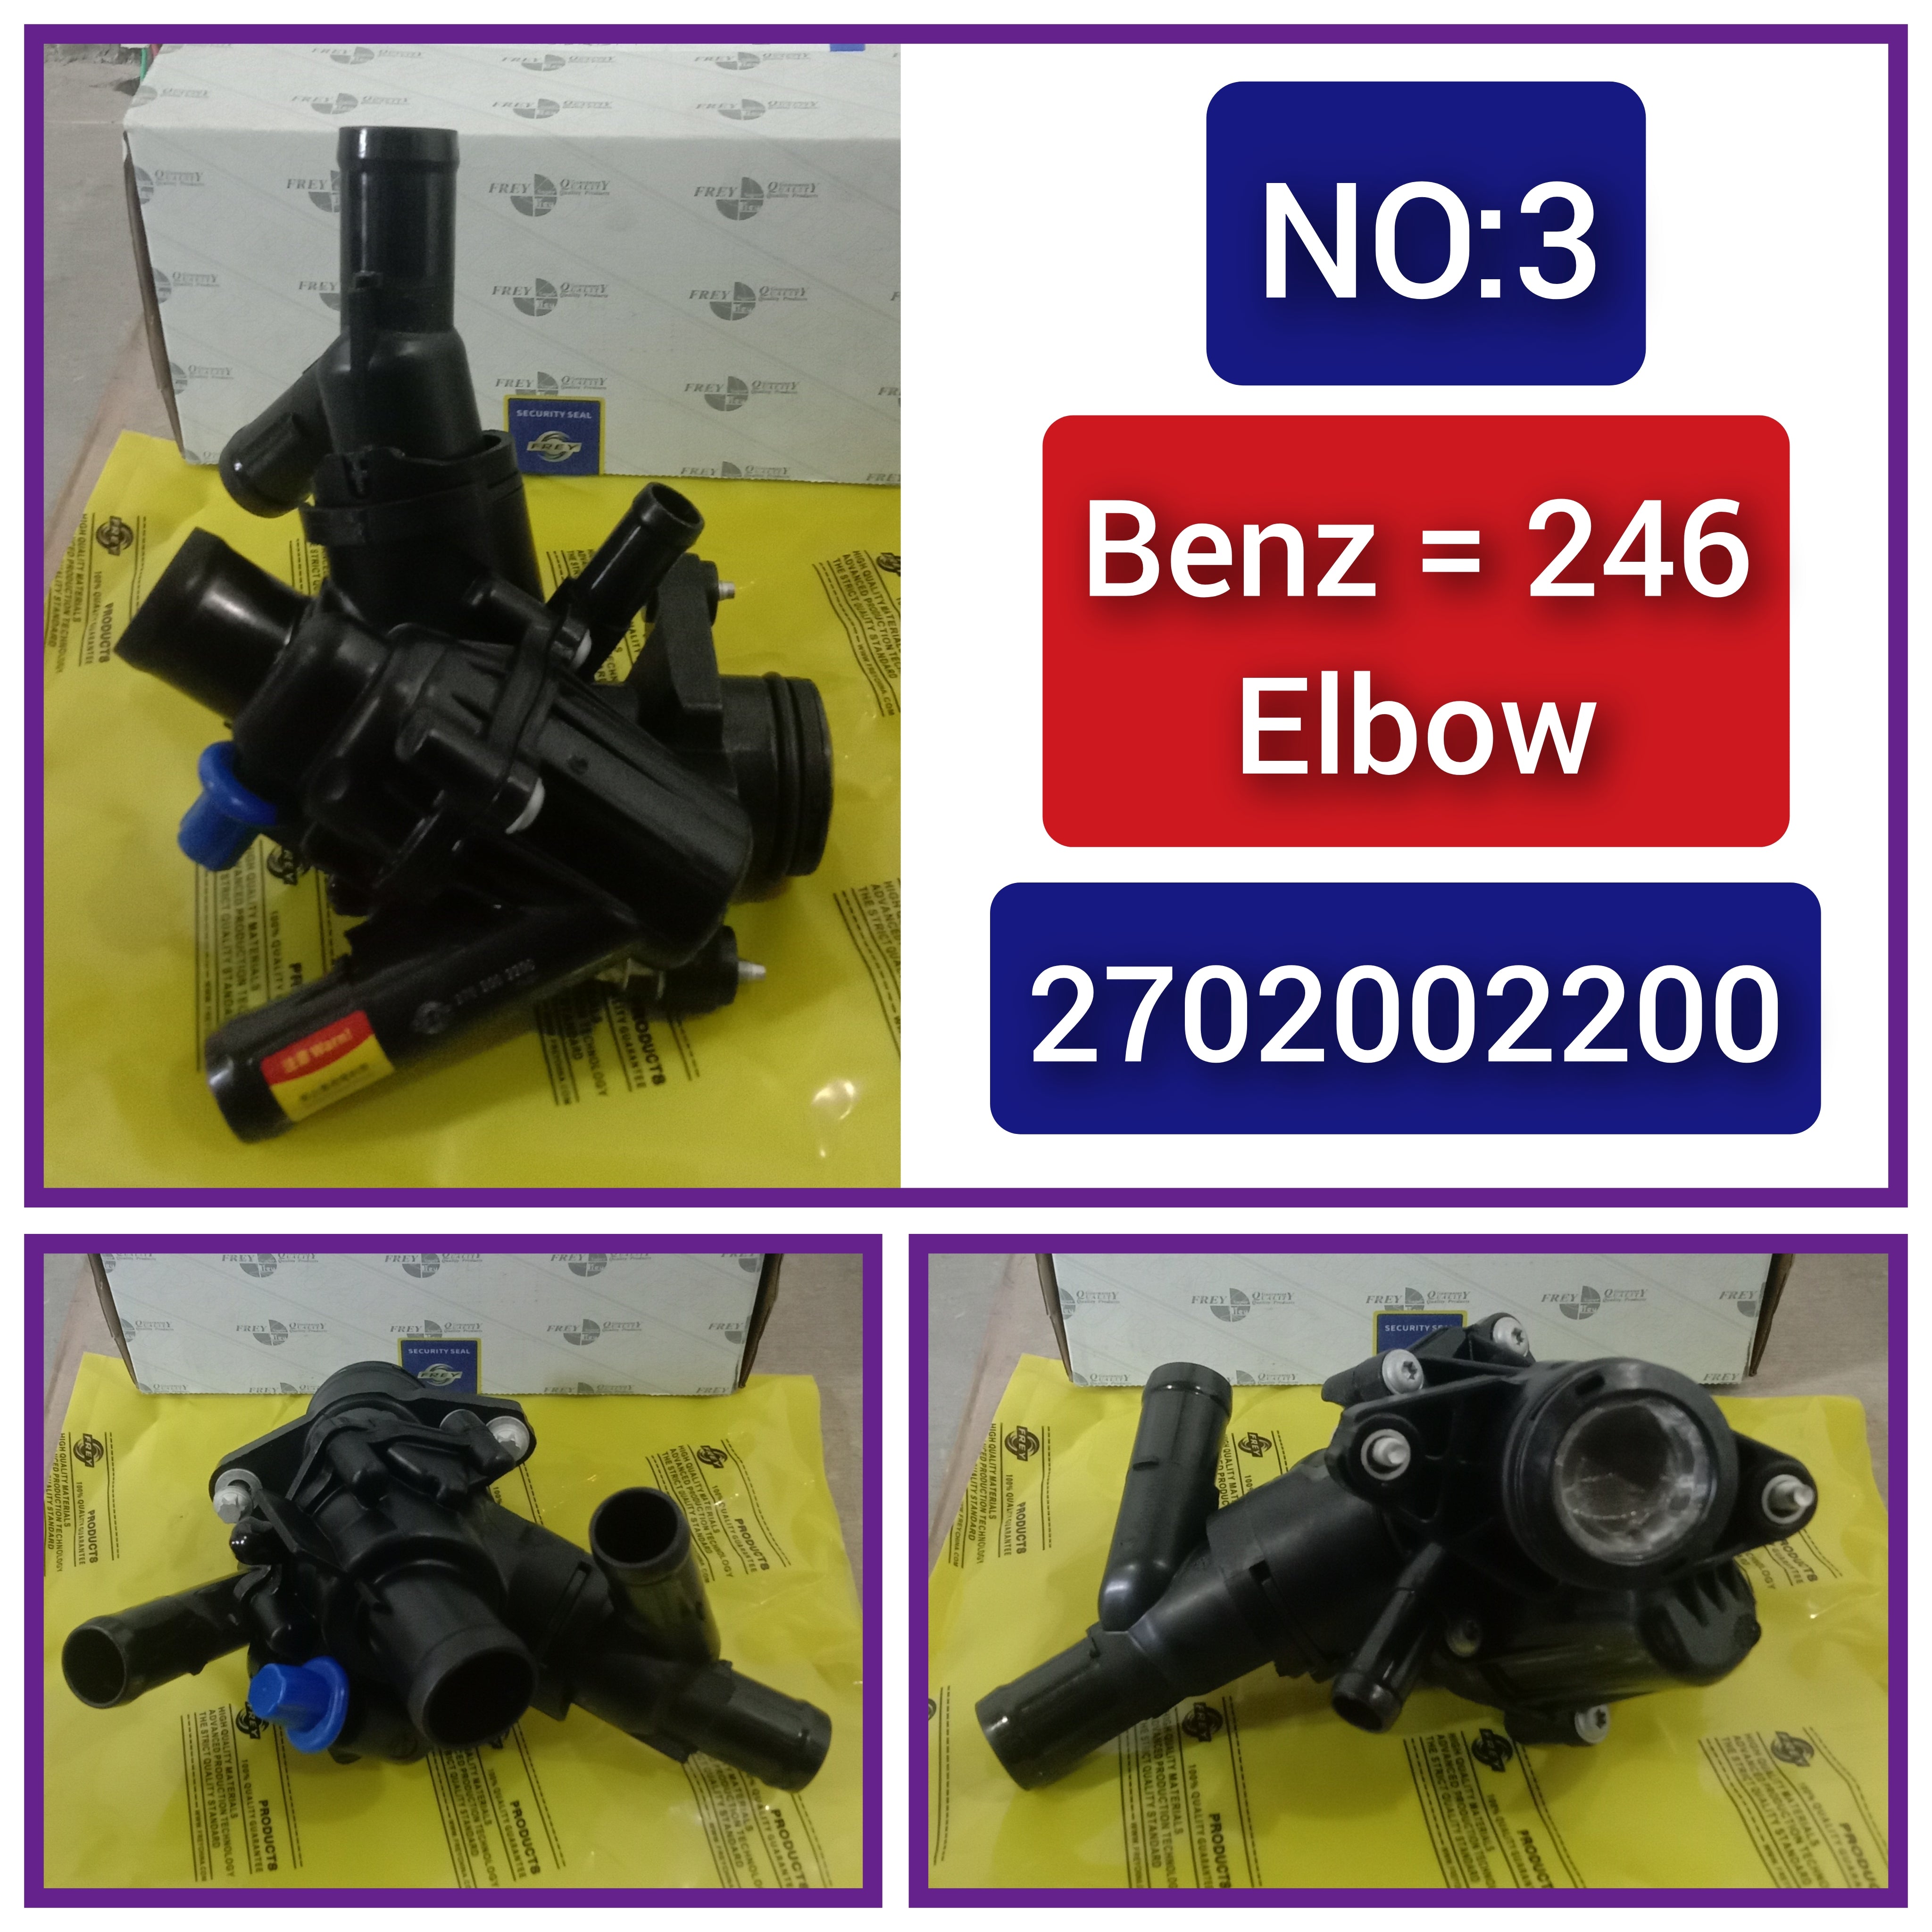 Elbow (Thermostat) 2702000615  2702002200 For MERCEDES-BENZ A-CLASS W176 & B-CLASS W246, GLA-CLASS X156  Tag-E-03